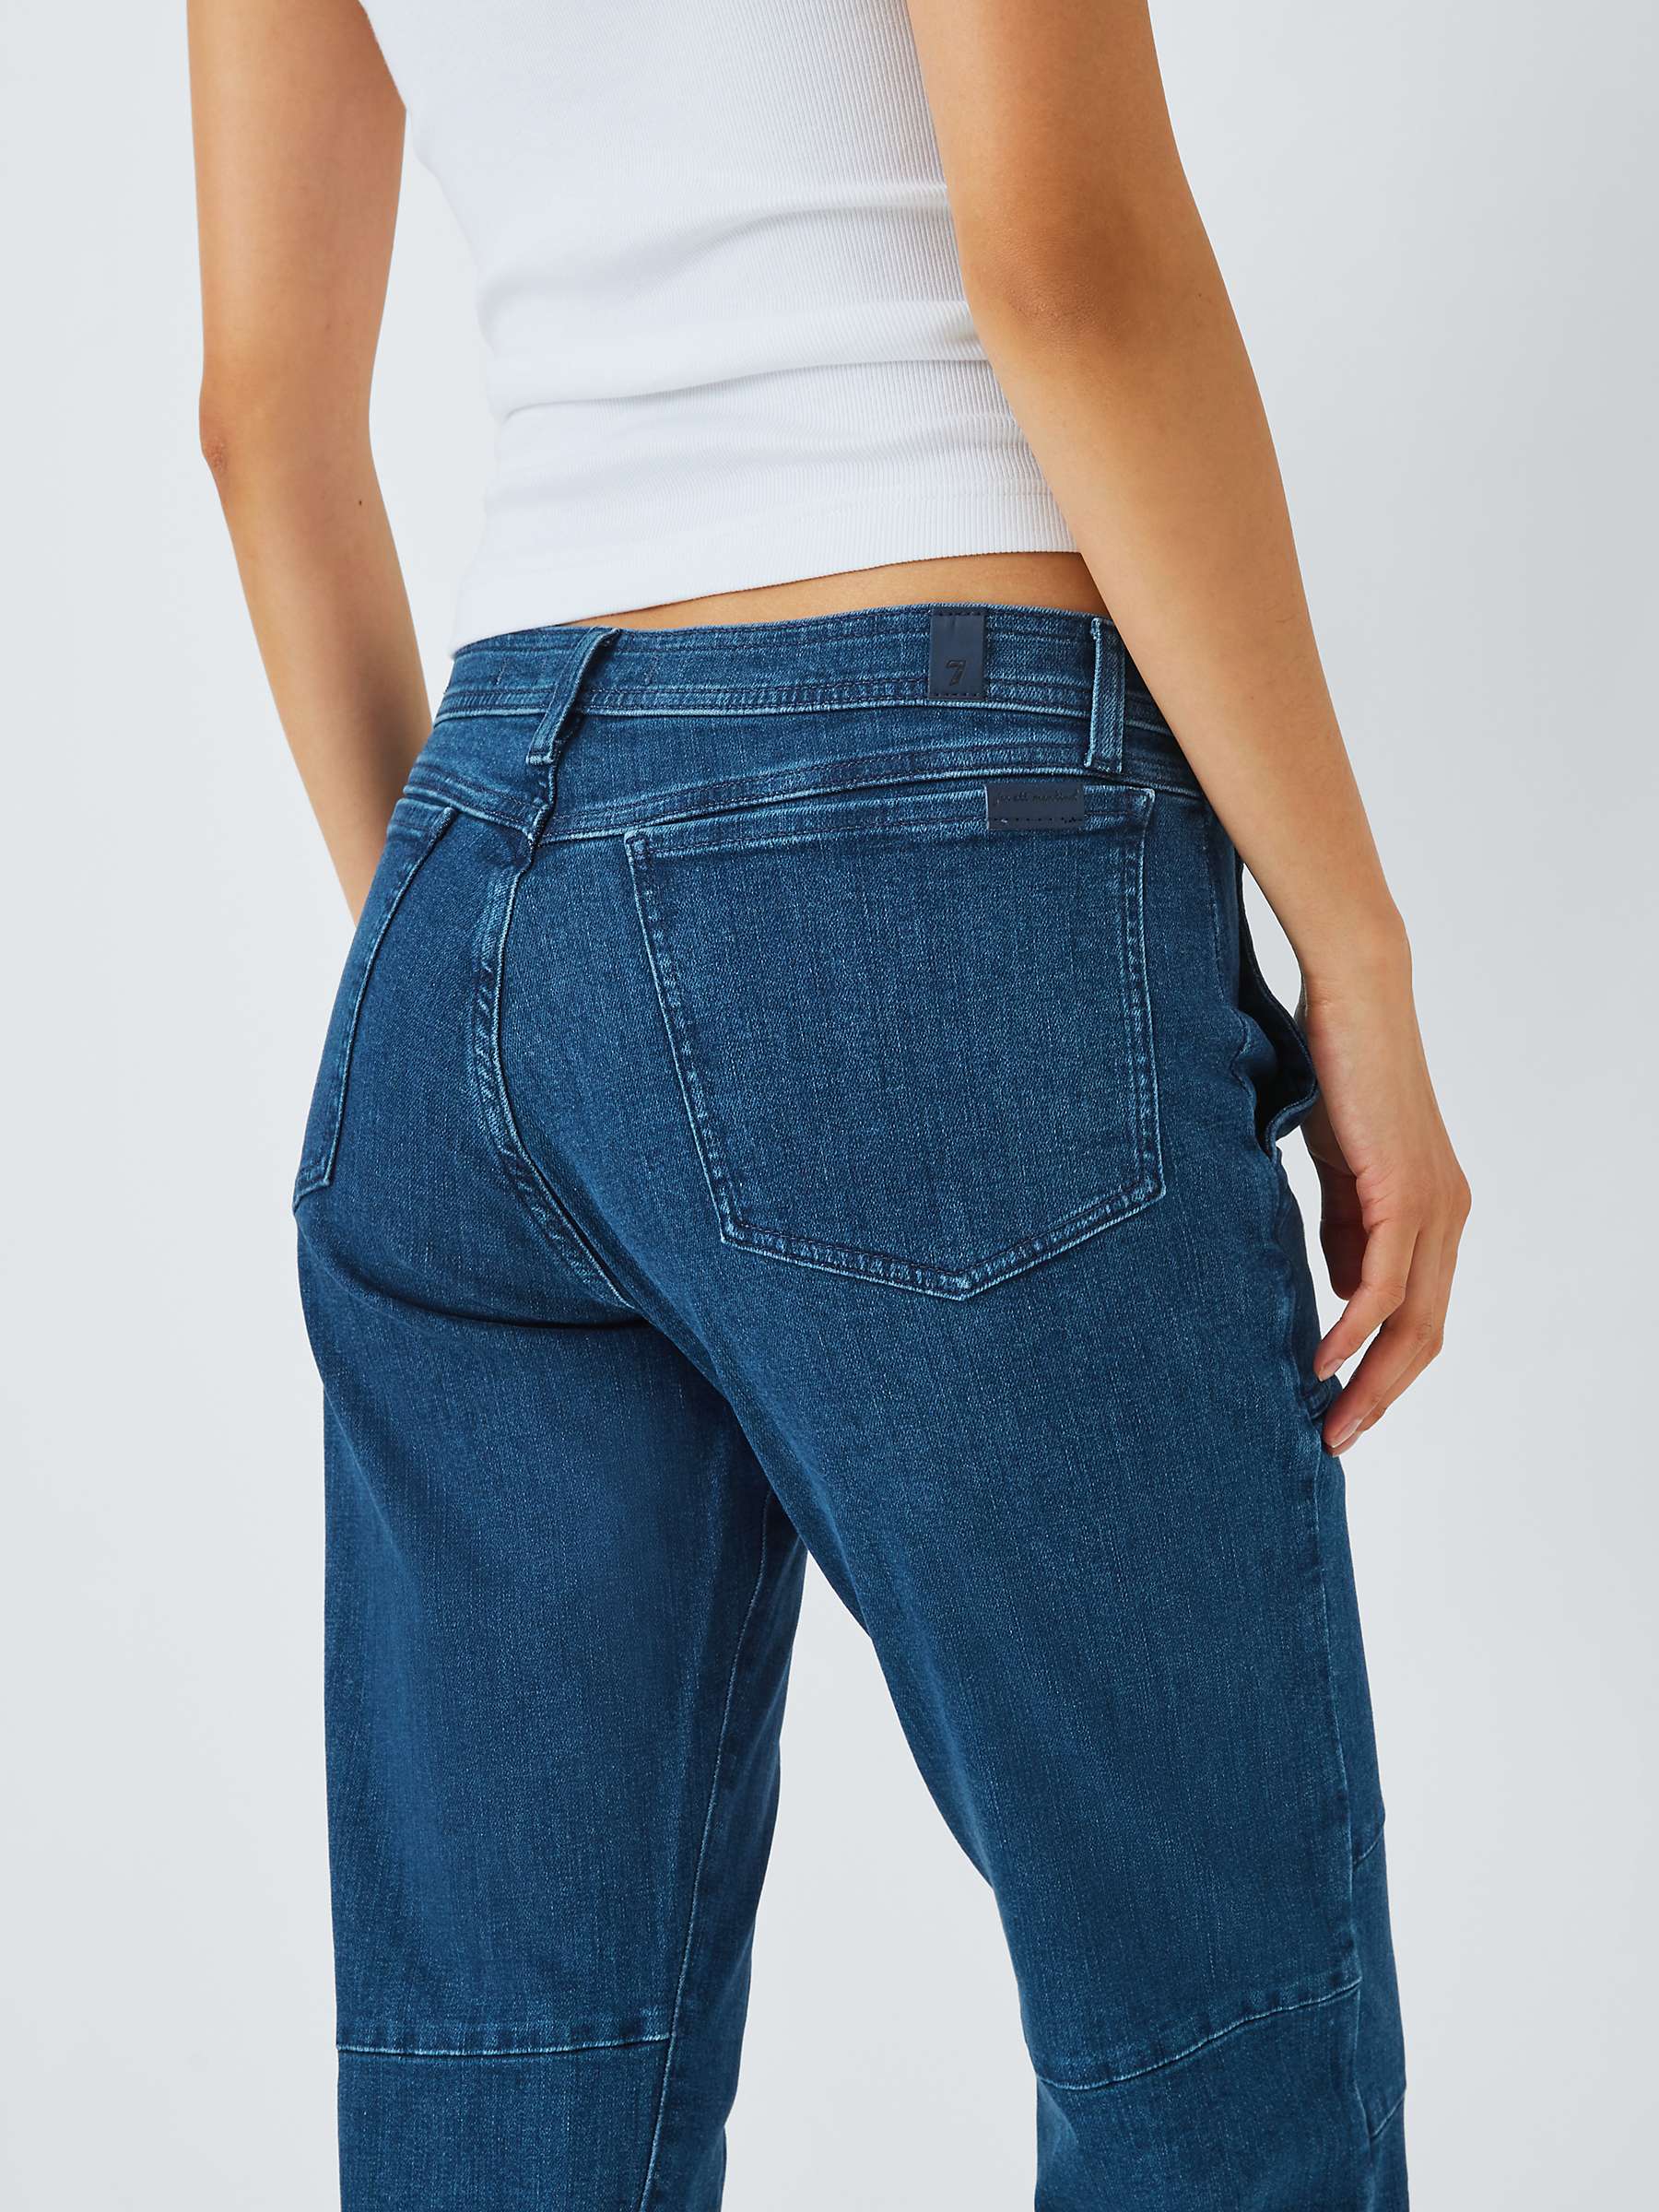 Buy 7 For All Mankind Darted Boyfriend Jogger Jeans, Slim Illusion Saturday Online at johnlewis.com